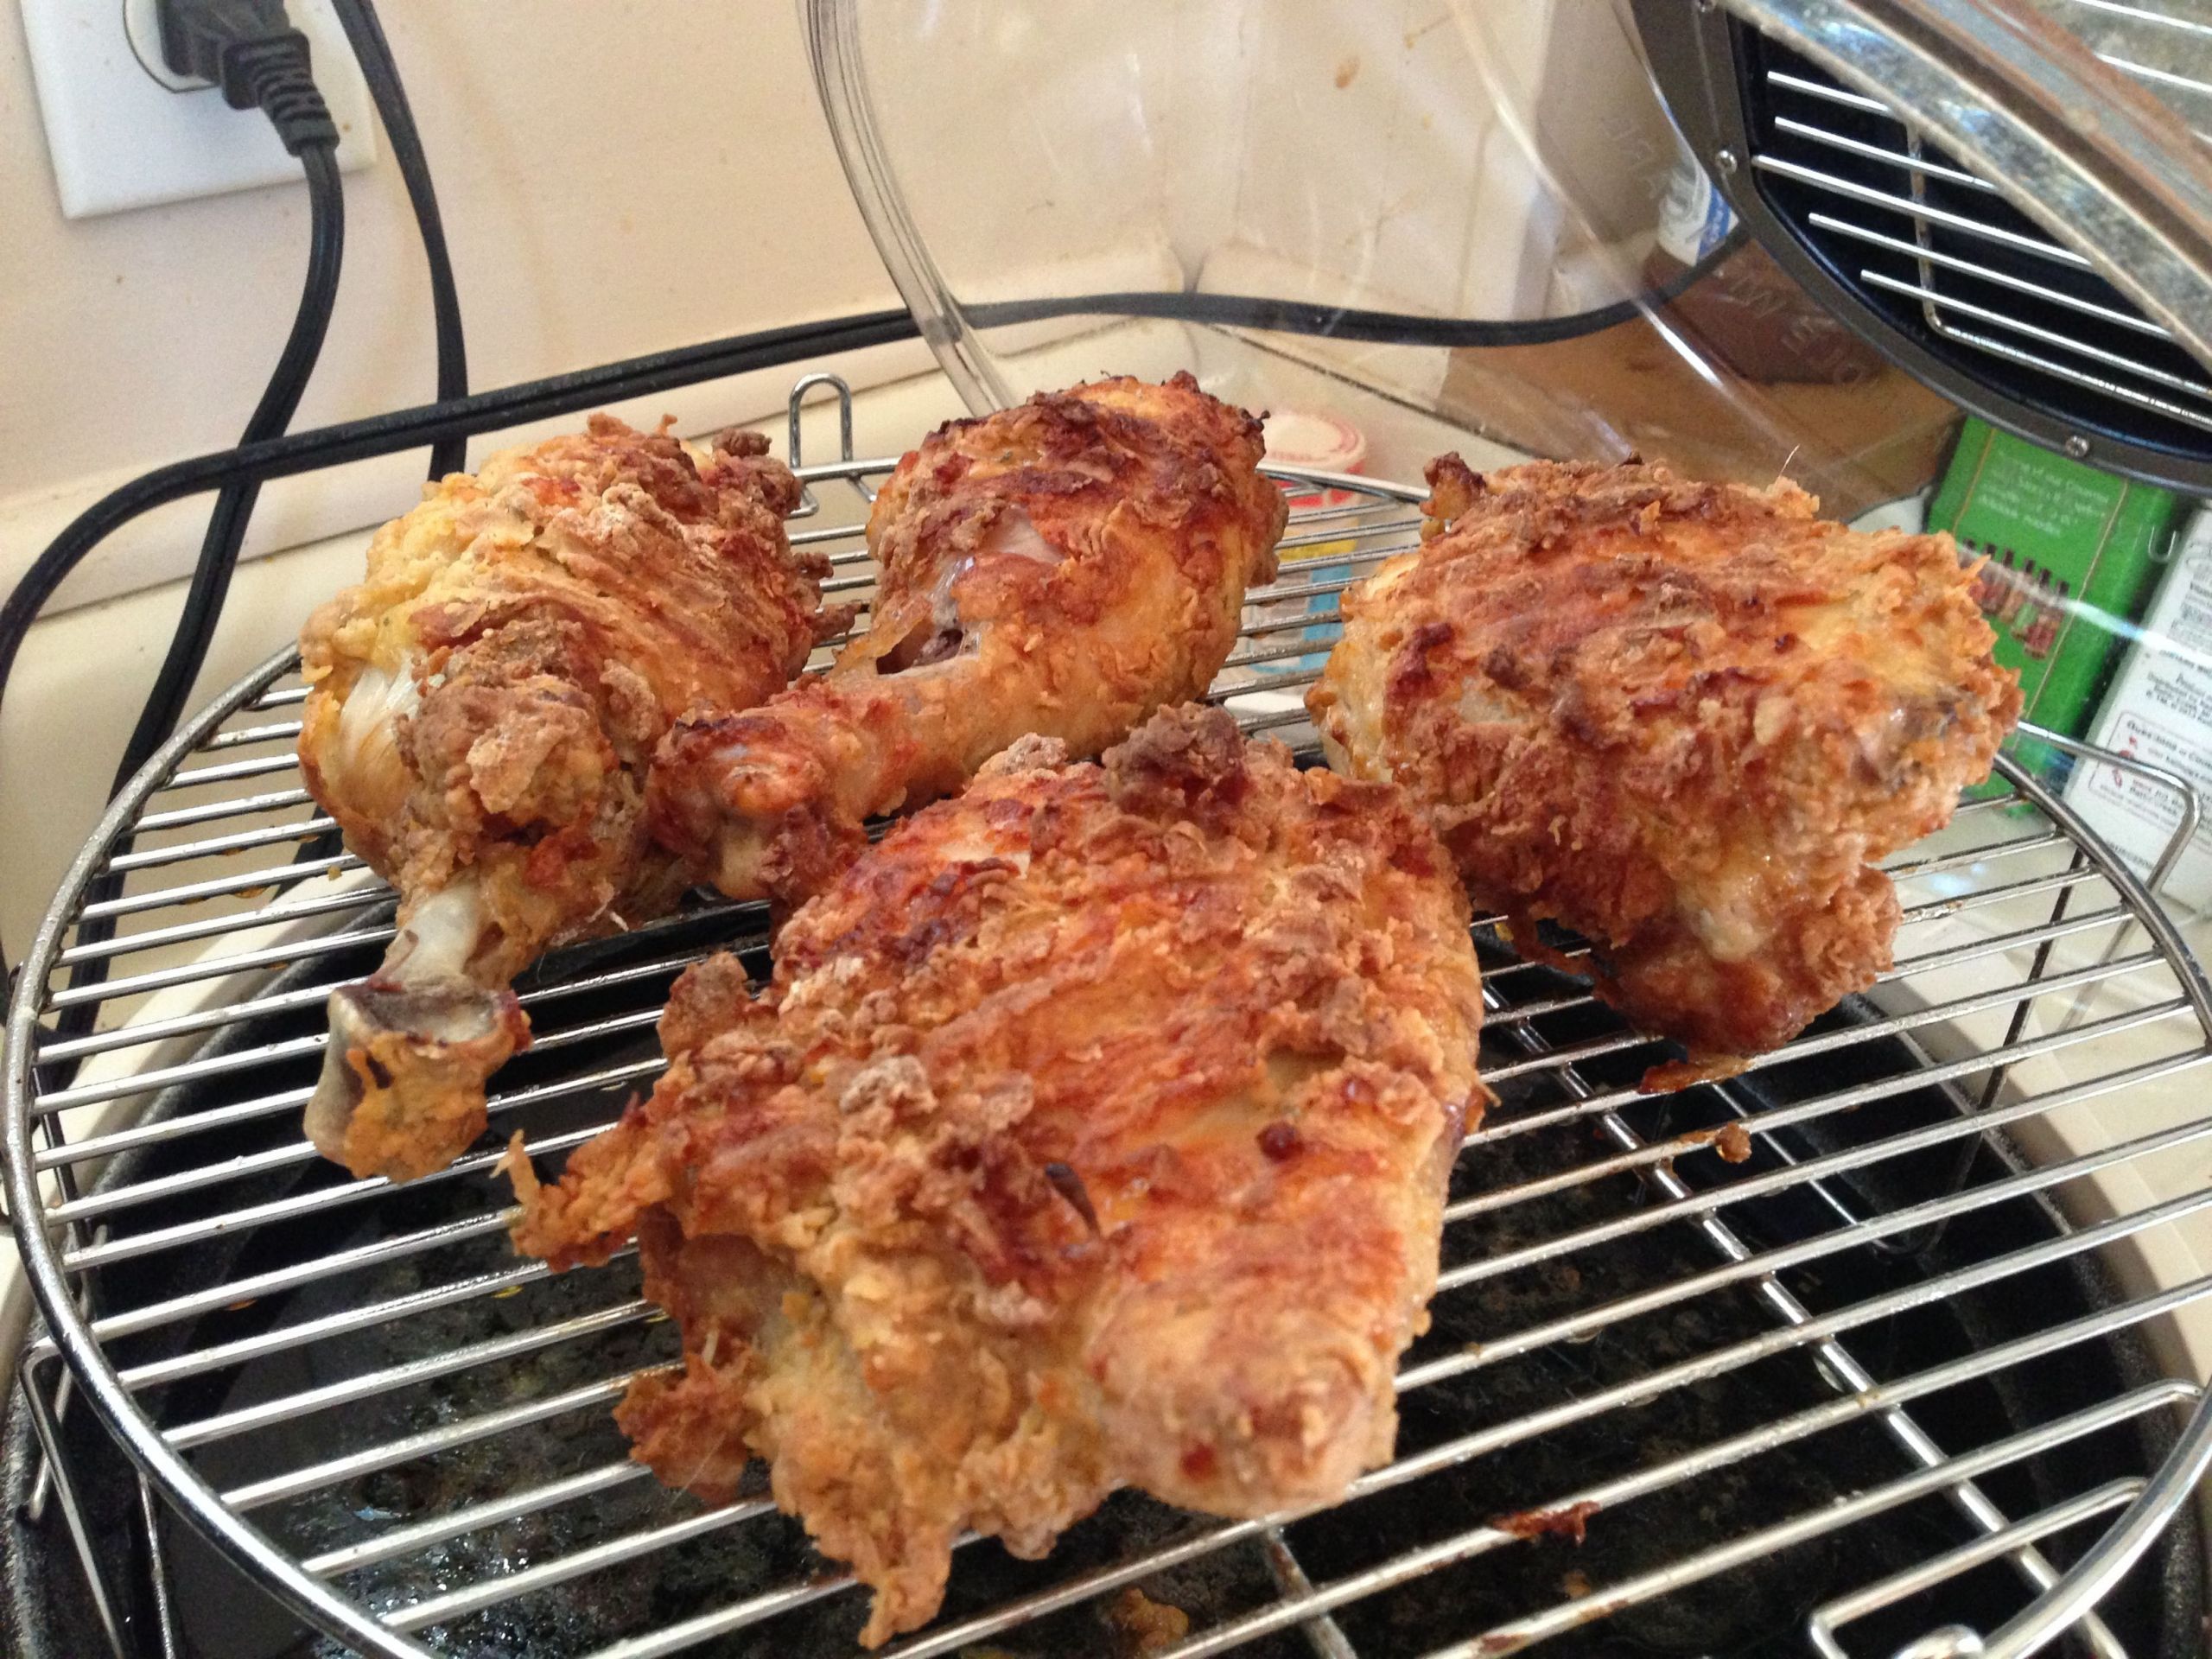 Nuwave Air Fryer Fried Chicken
 Delicious Air Fried Chicken cooked on the Nuwave Oven